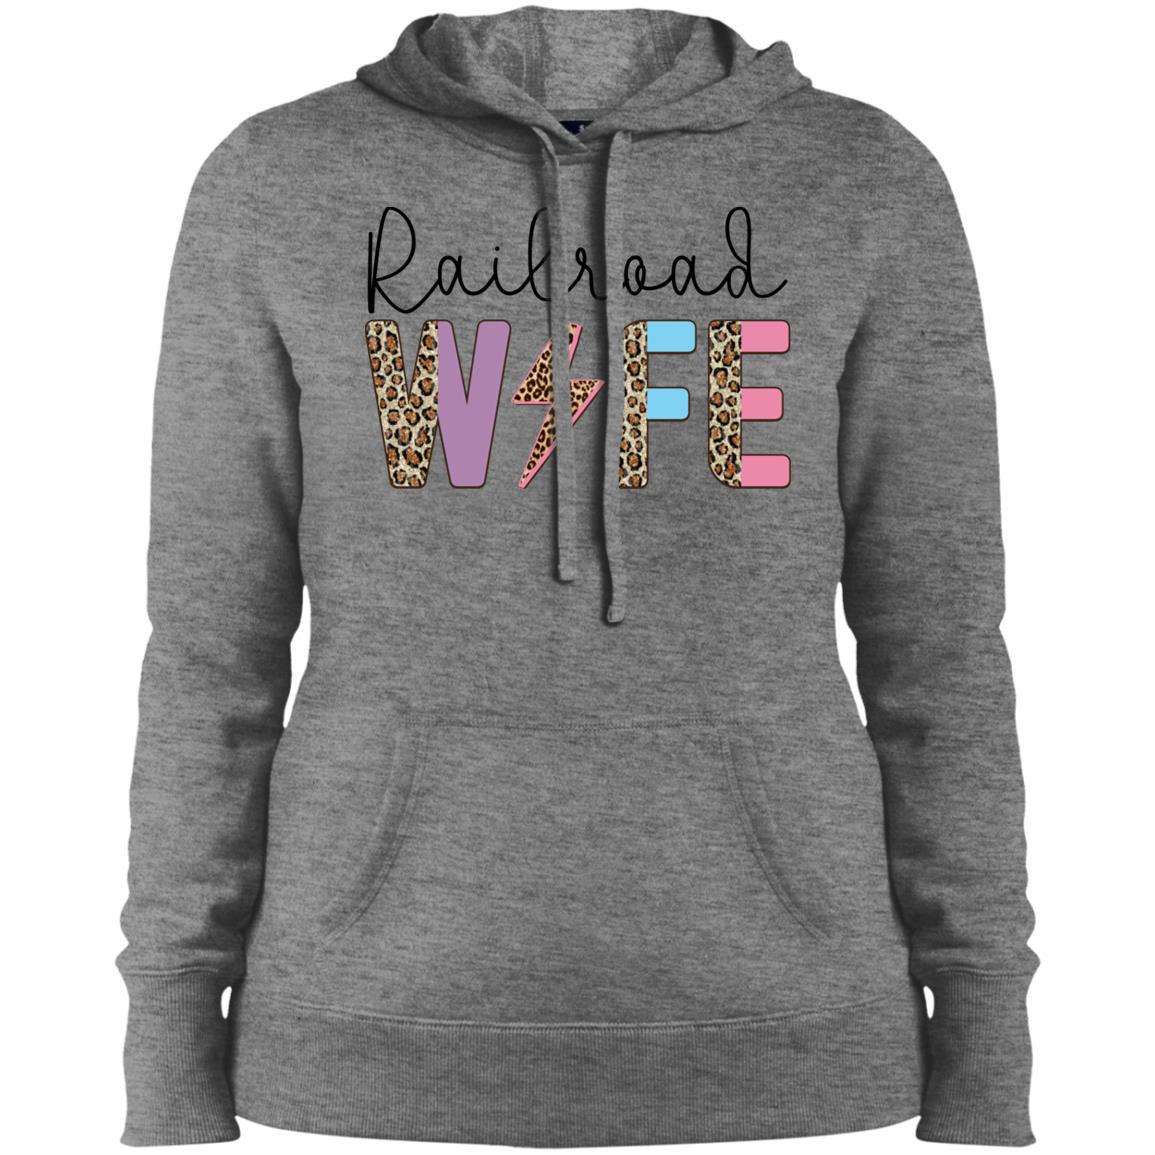 Railroad Wife Expensive, Difficult, and Talks Back Ladies' Pullover Hooded Sweatshirt